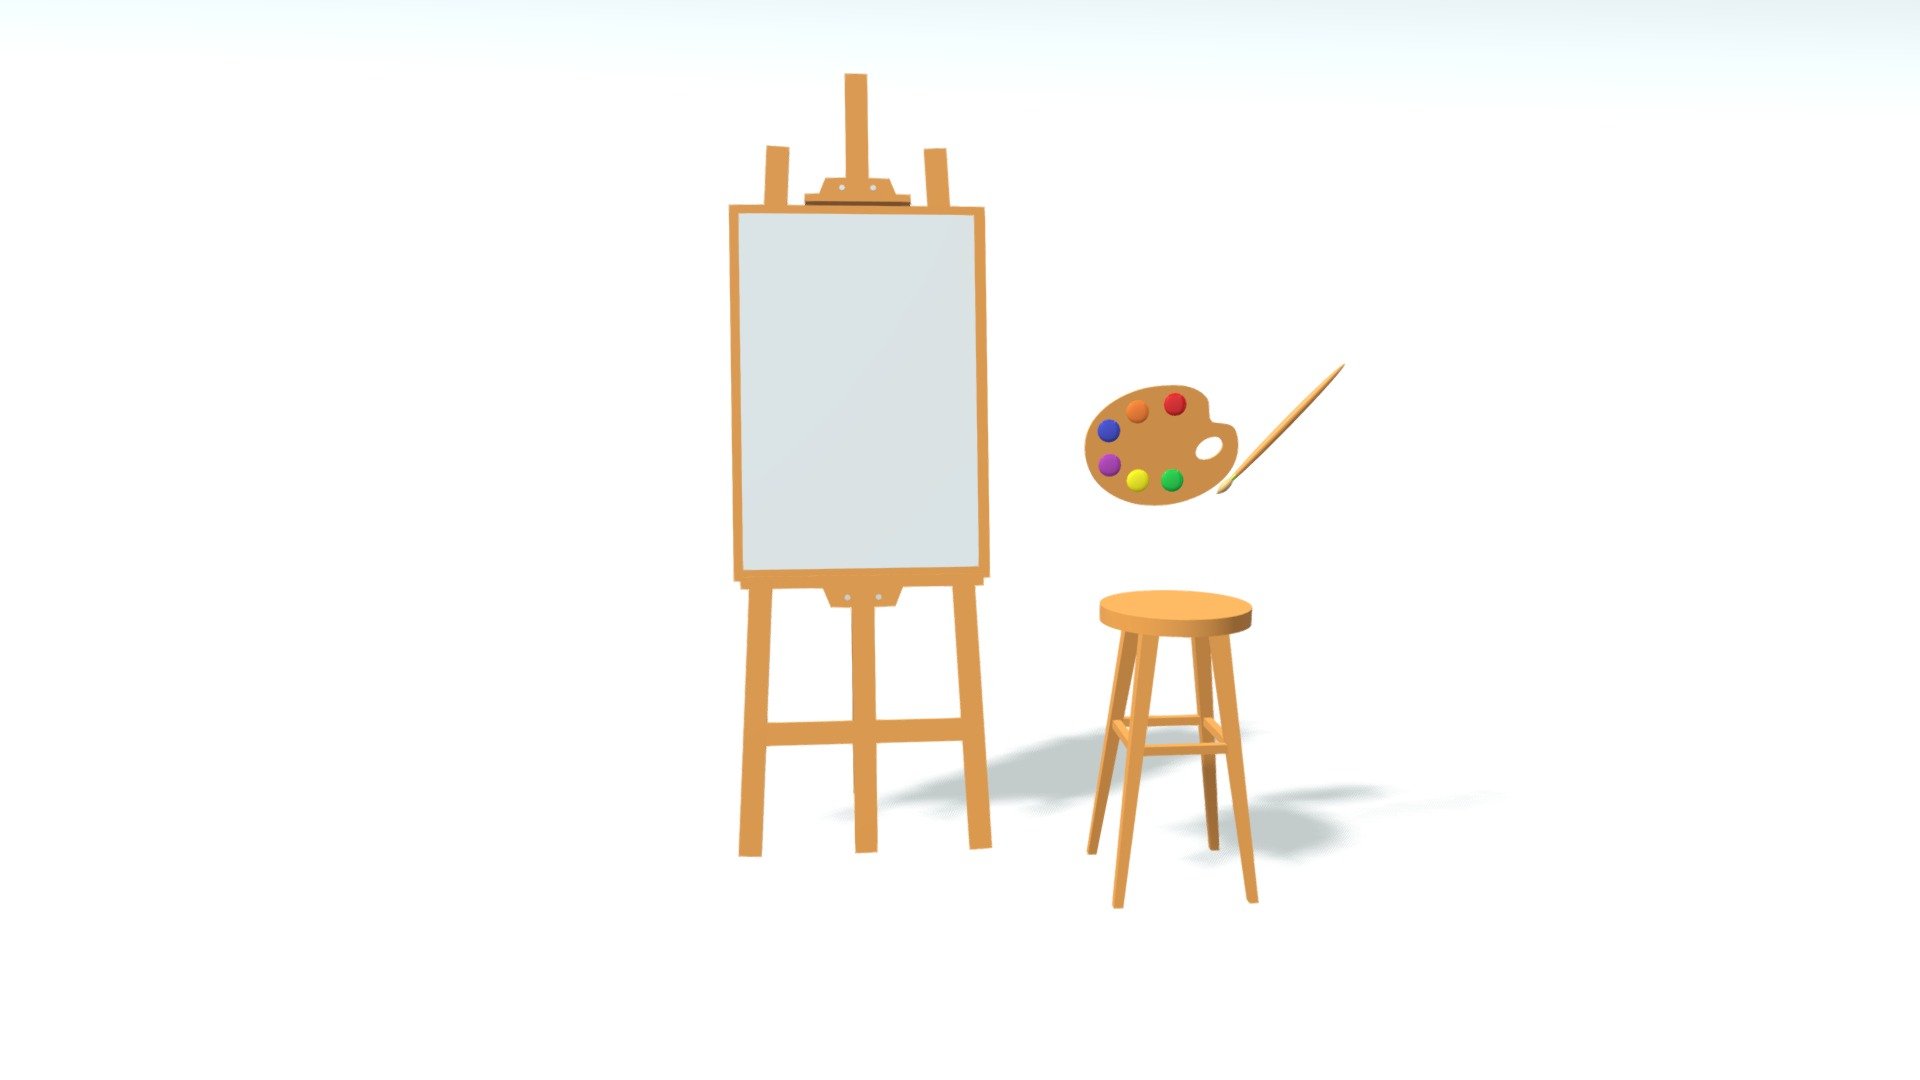 -Cartoon Easel and Artist Palette.

-This product contains 2 objects.

-Vert: 3,542 poly: 3,166.

-This product was created in Blender 2.8.

-Formats: blend, fbx, obj, c4d, dae, abc, stl, u4d glb, unity.

-We hope you enjoy this model.

-Thank you 3d model